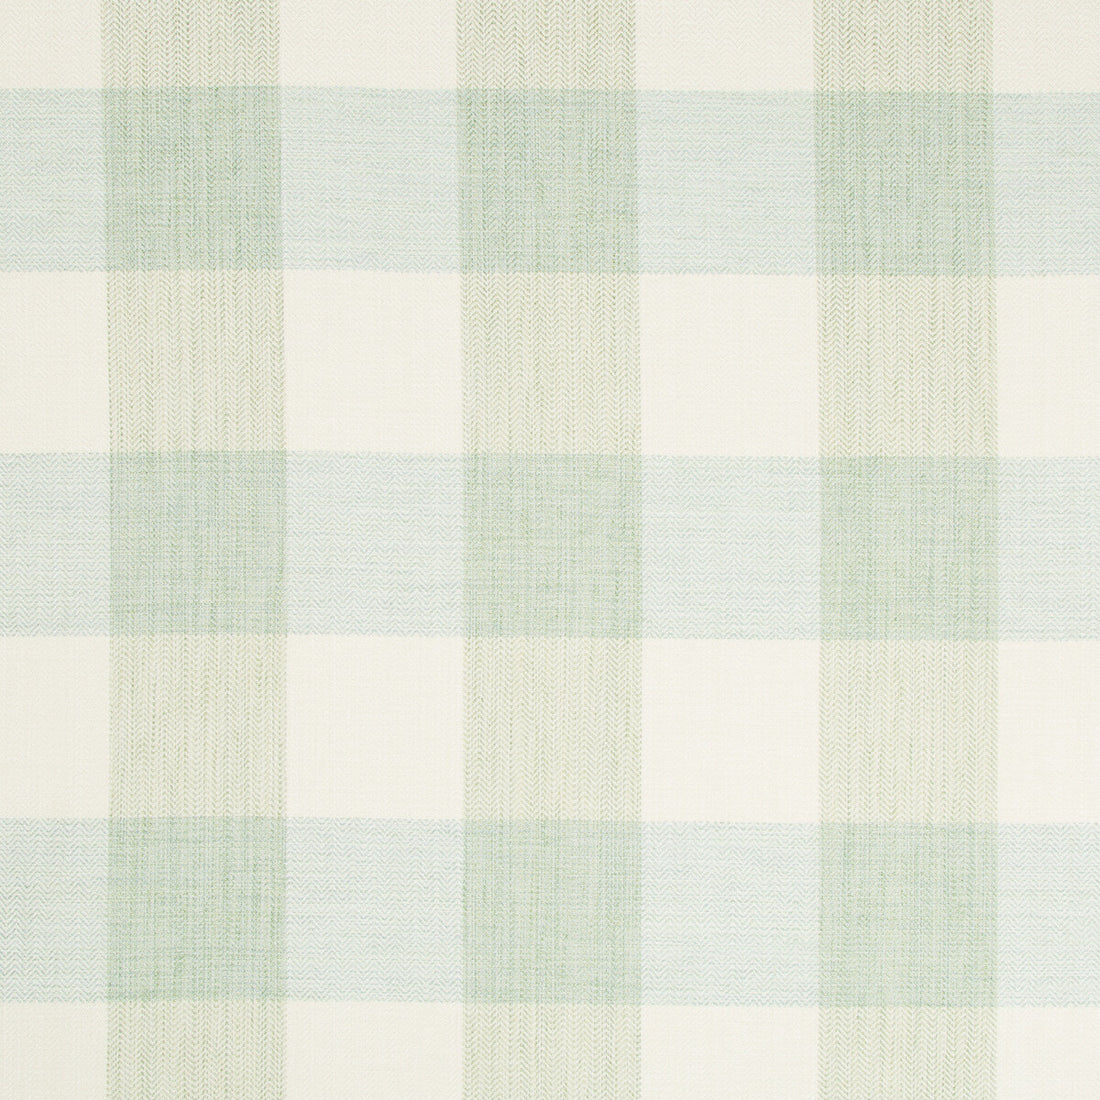 Barnsdale fabric in leaf color - pattern 35306.3.0 - by Kravet Basics in the Greenwich collection